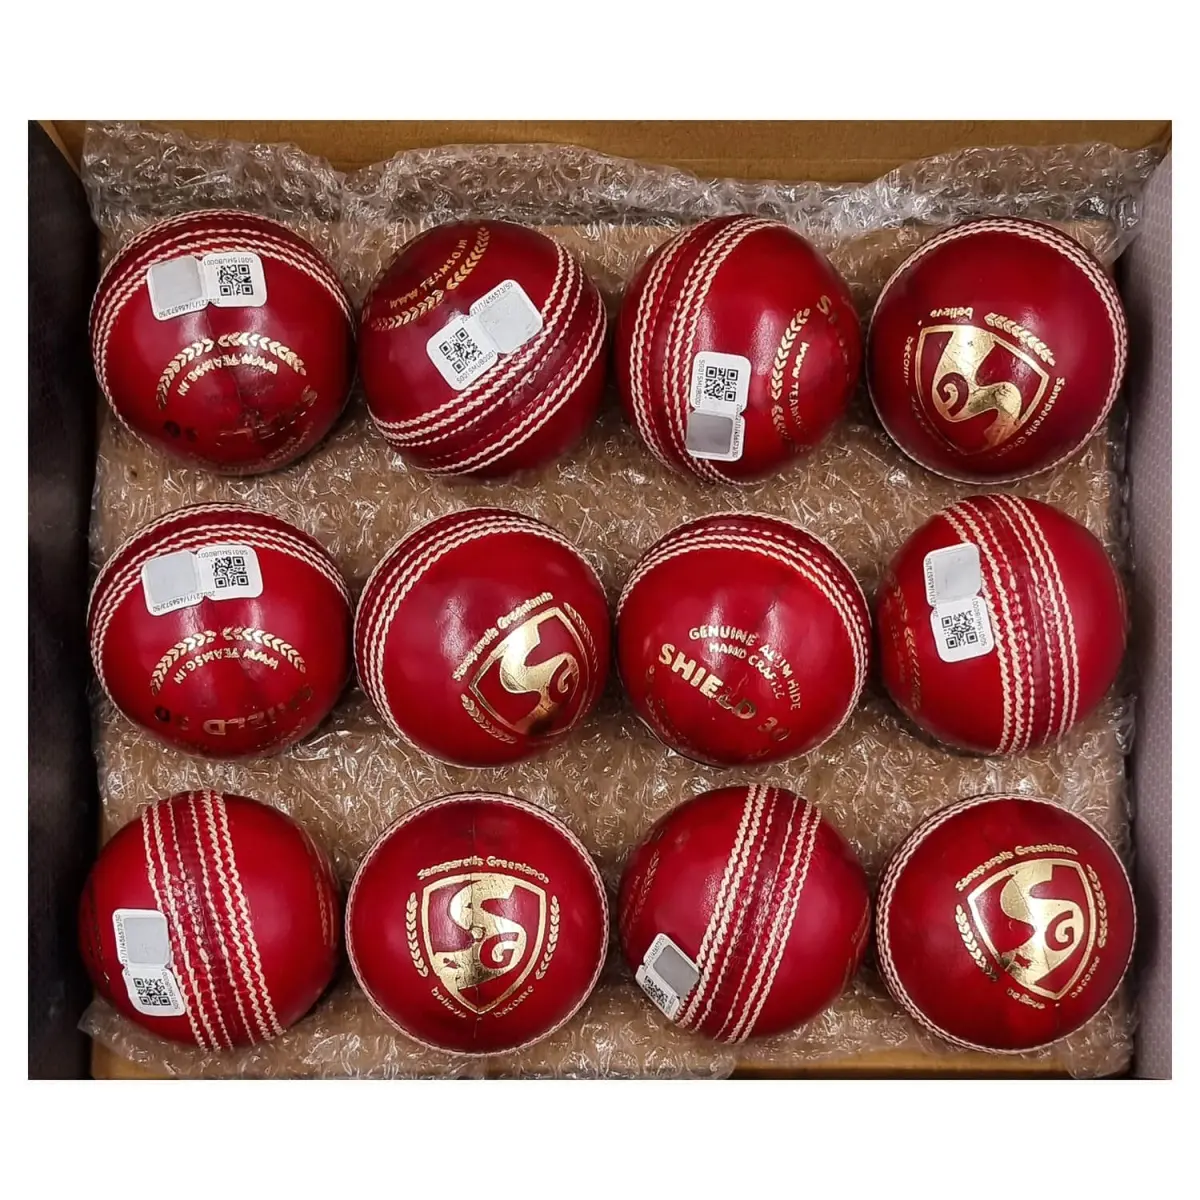 Buy SG Shield 30 (Red) Cricket Ball - Pack of 12 - Sportsuncle